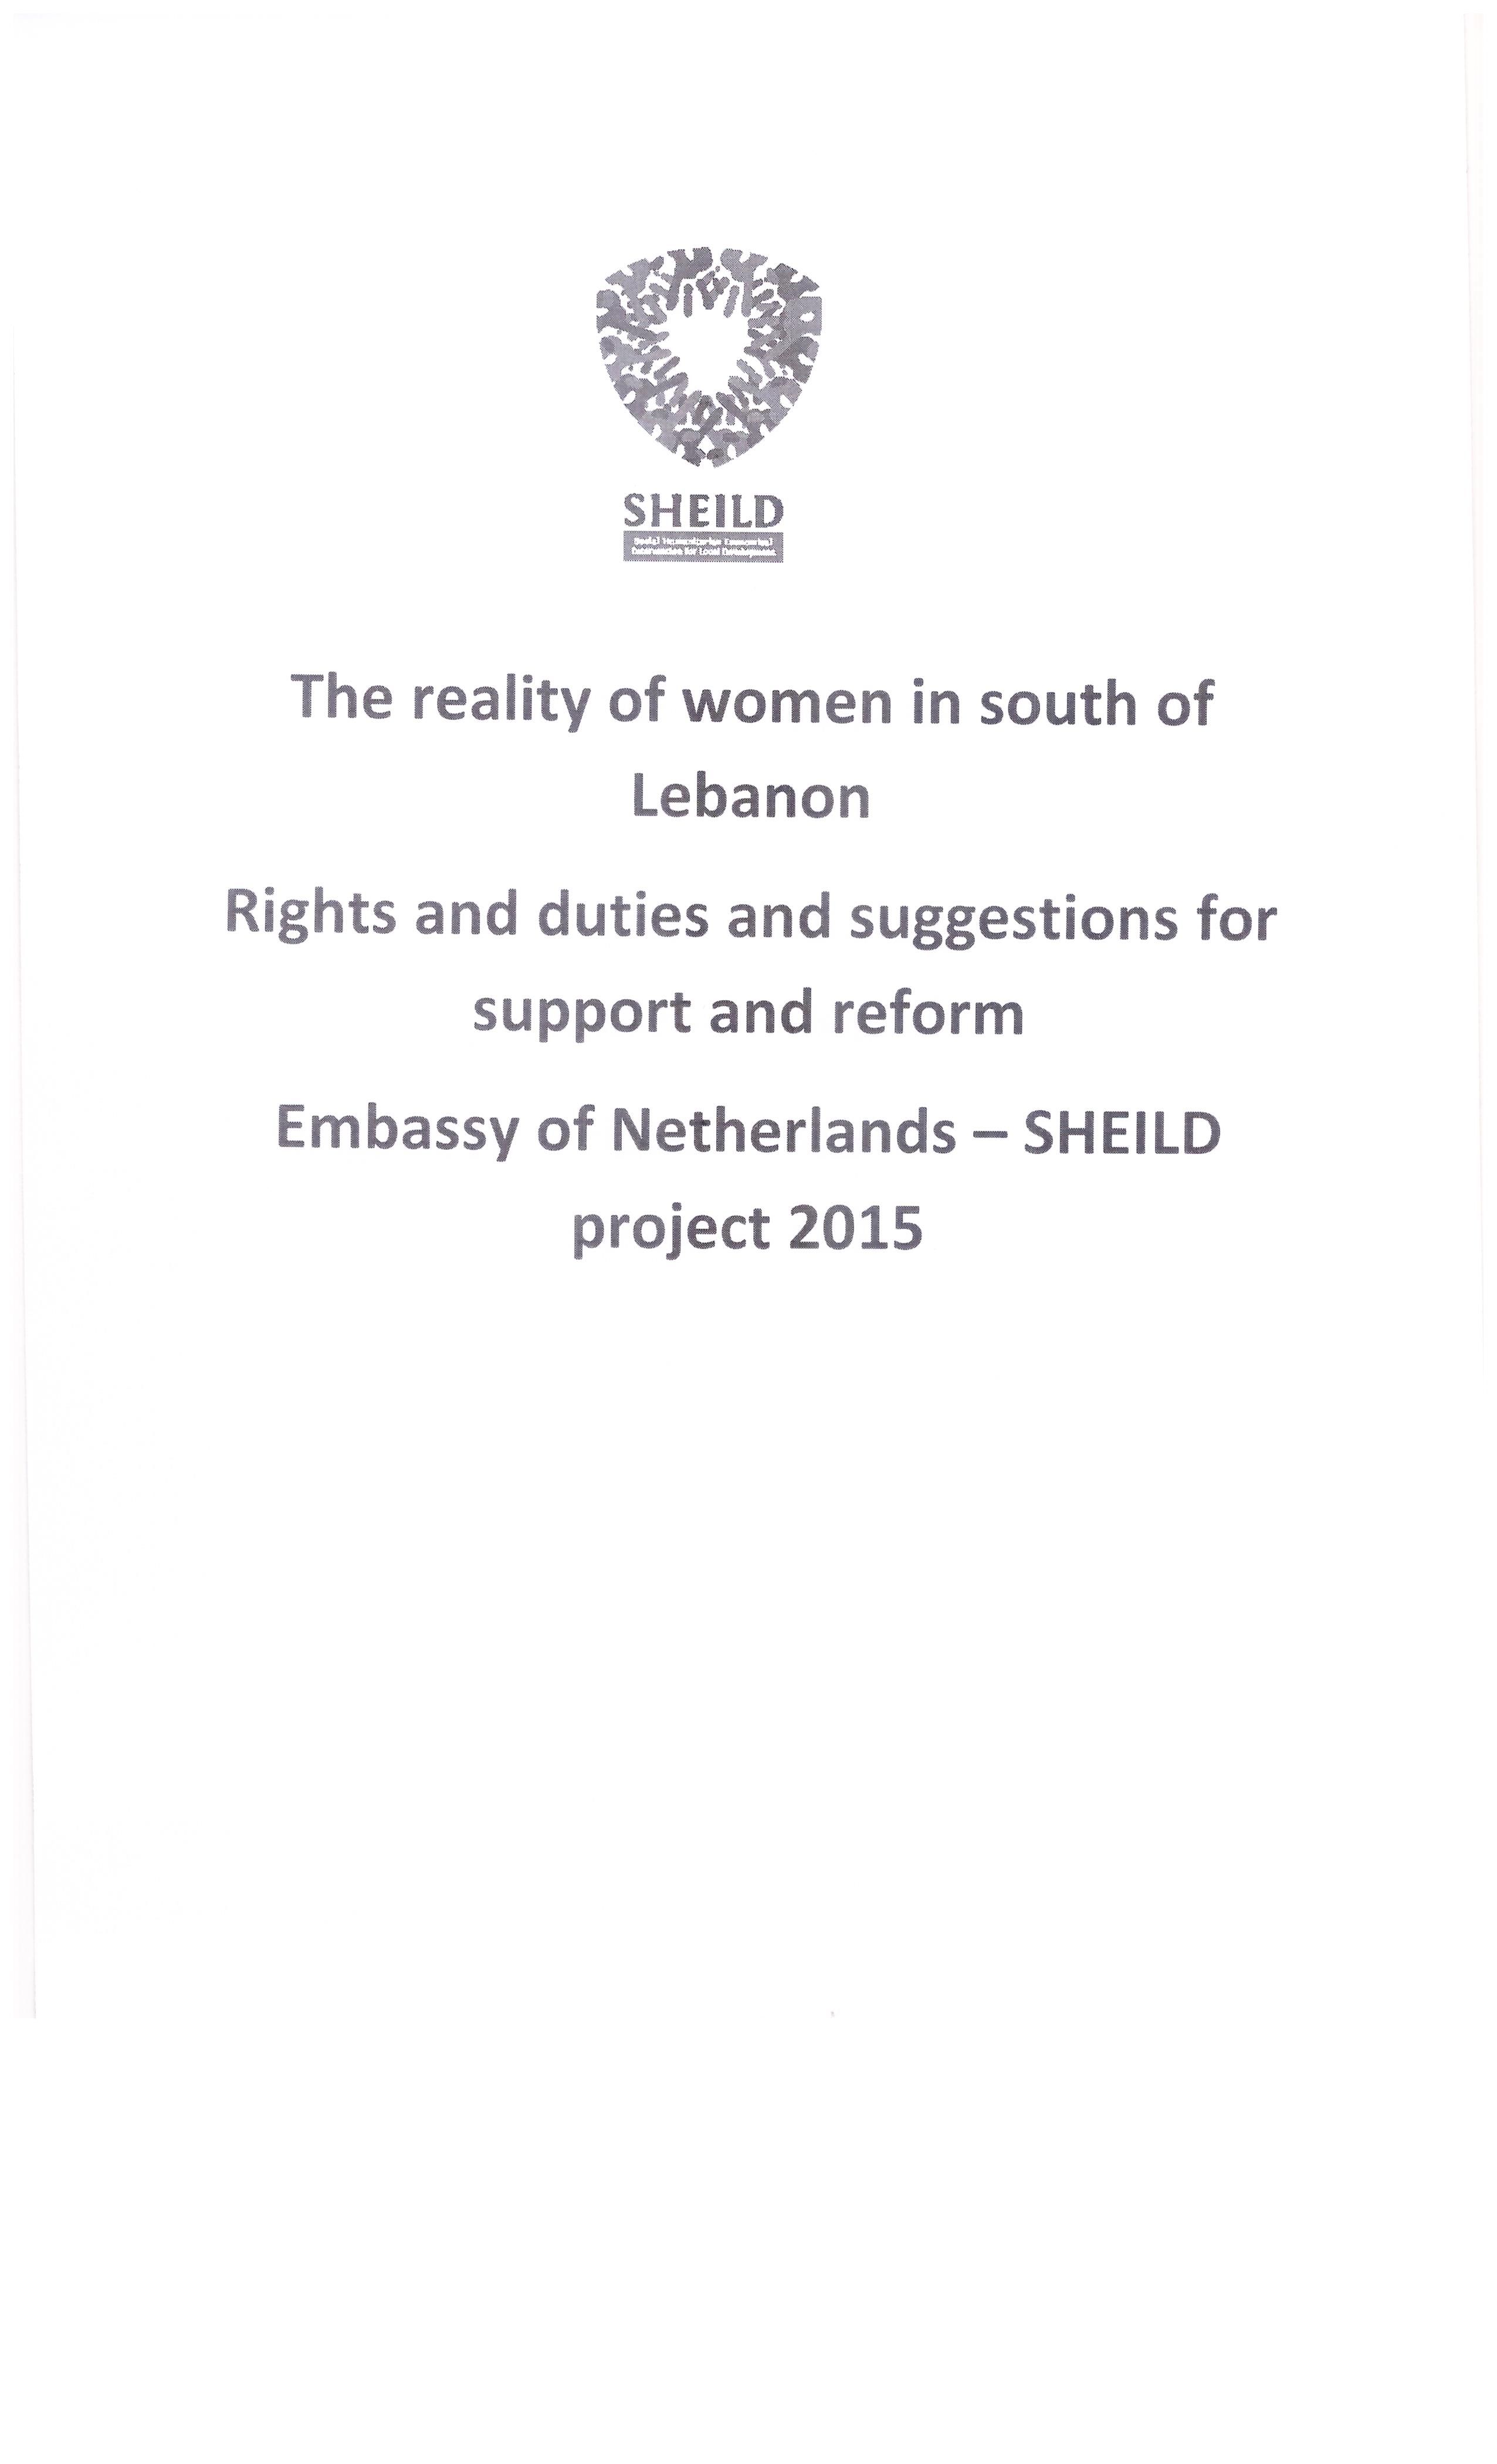 The Reality Of Women In South Lebanon: Rights, Duties And Suggestions For Support And Reform